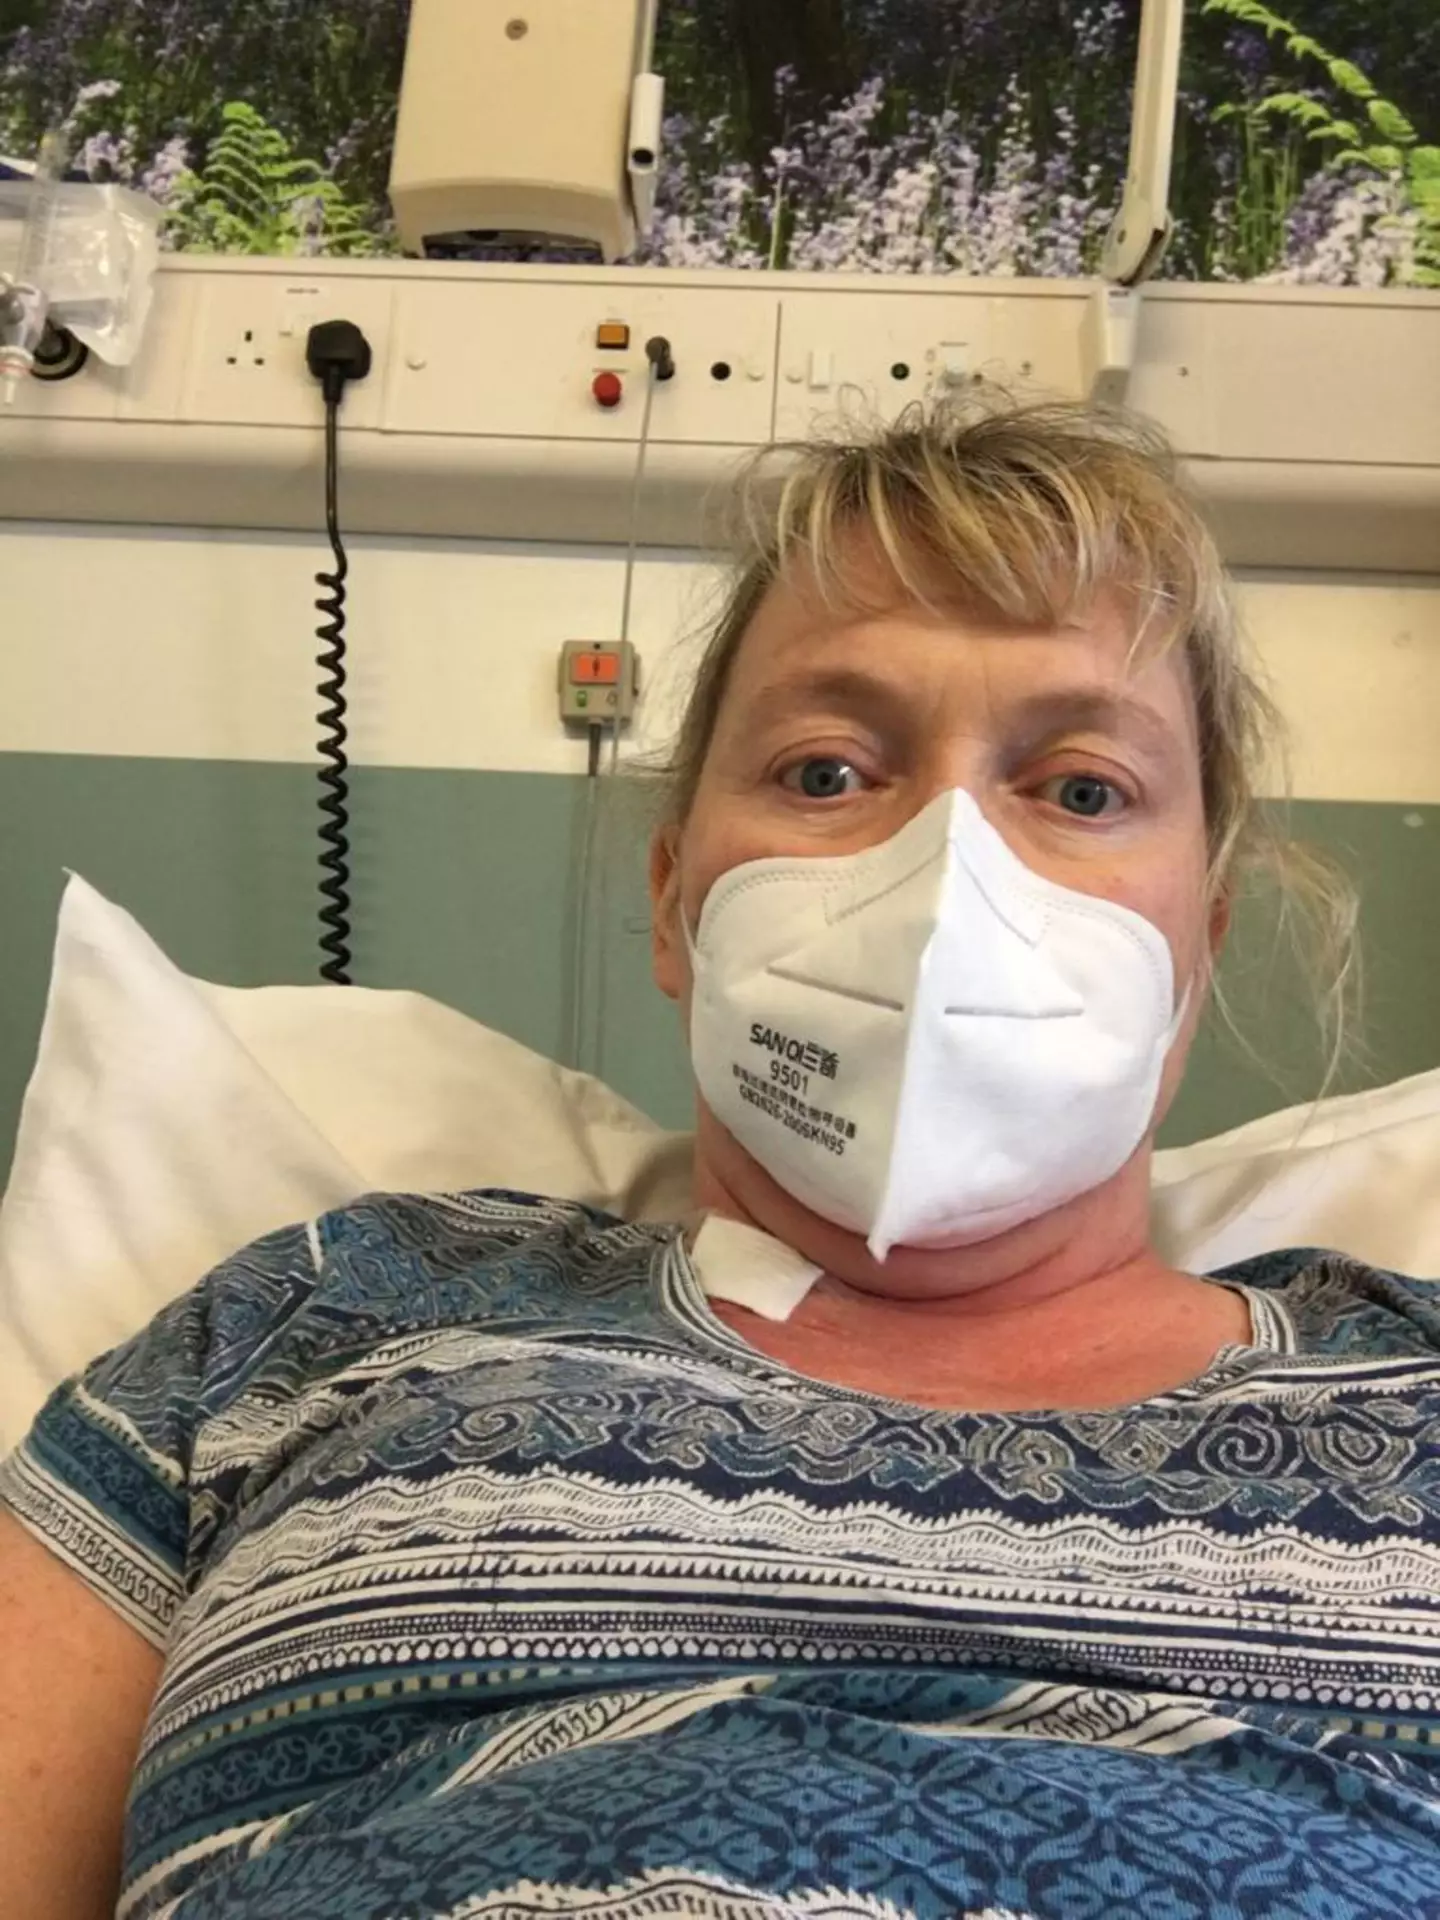 Rachael Prydderch, from Leicester was diagnosed with stage four cancer during the 2020 lockdown.